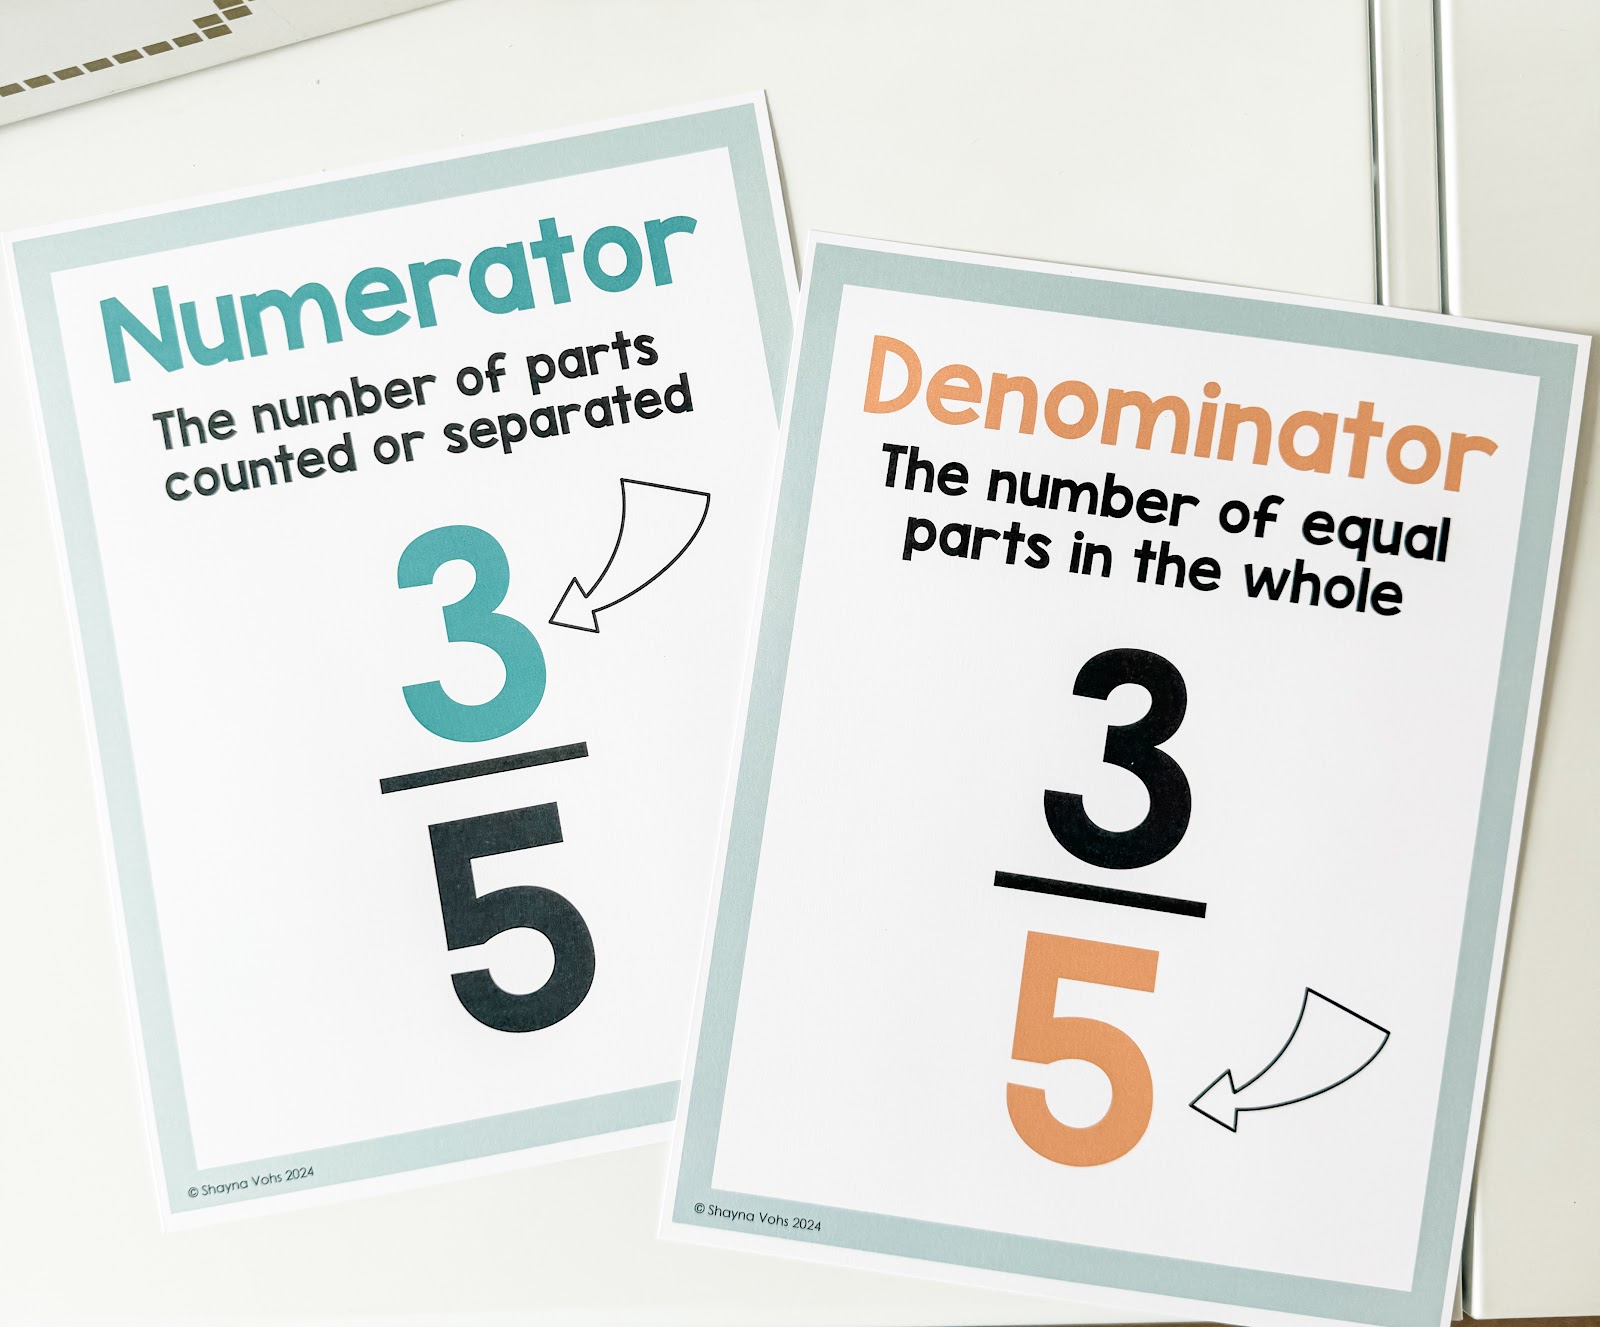 This image shows fraction anchor charts. One is for Numerator and reads "The number of parts counted or separated". The other is for Denominator and reads "The number of equal parts in a whole." Both posters show an image with the text. 